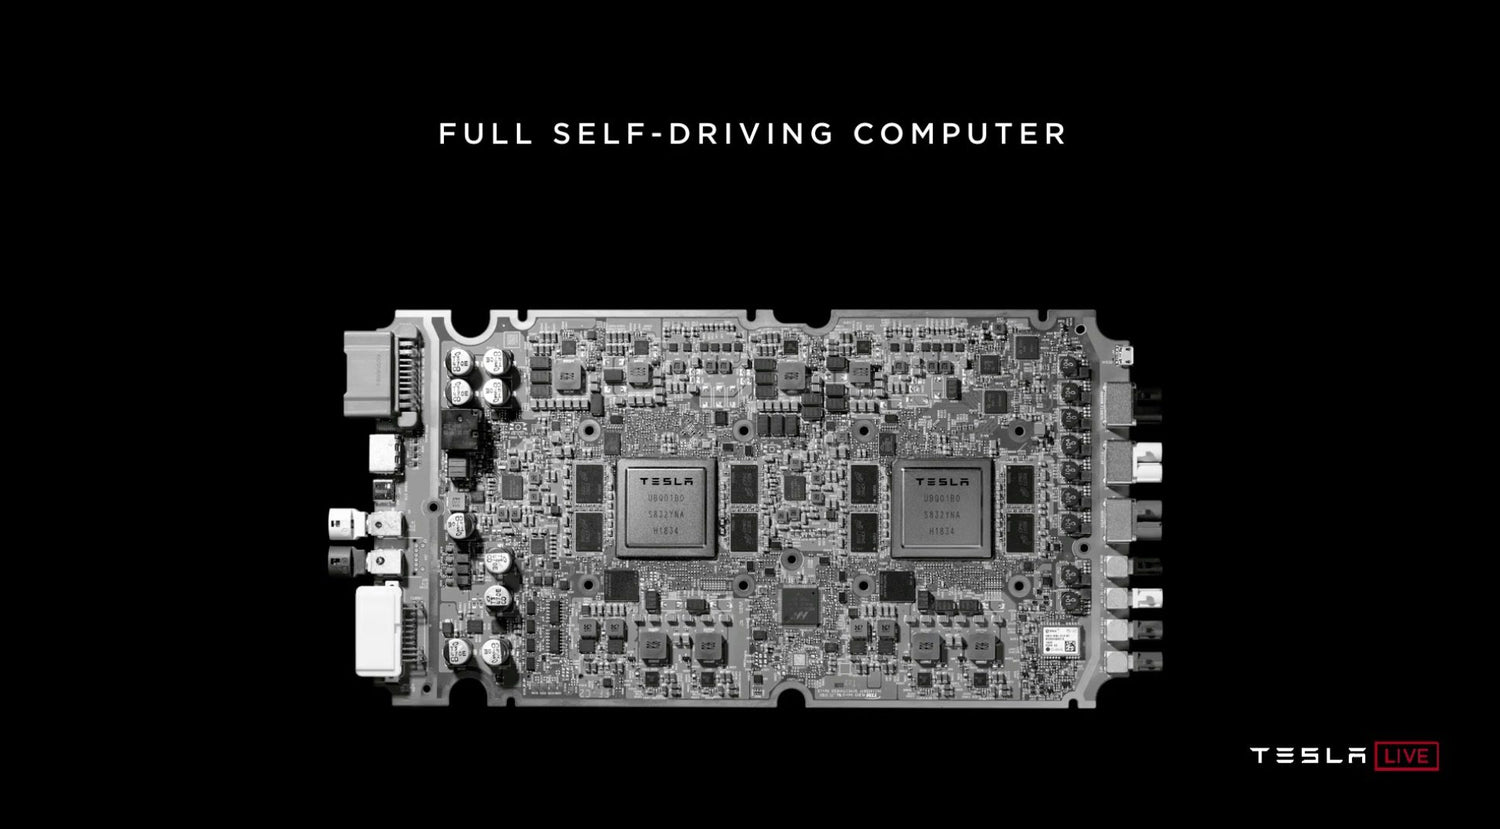 Elon Musk & Tesla Go it Alone to Create Autonomous Driving Chip, Here's Why